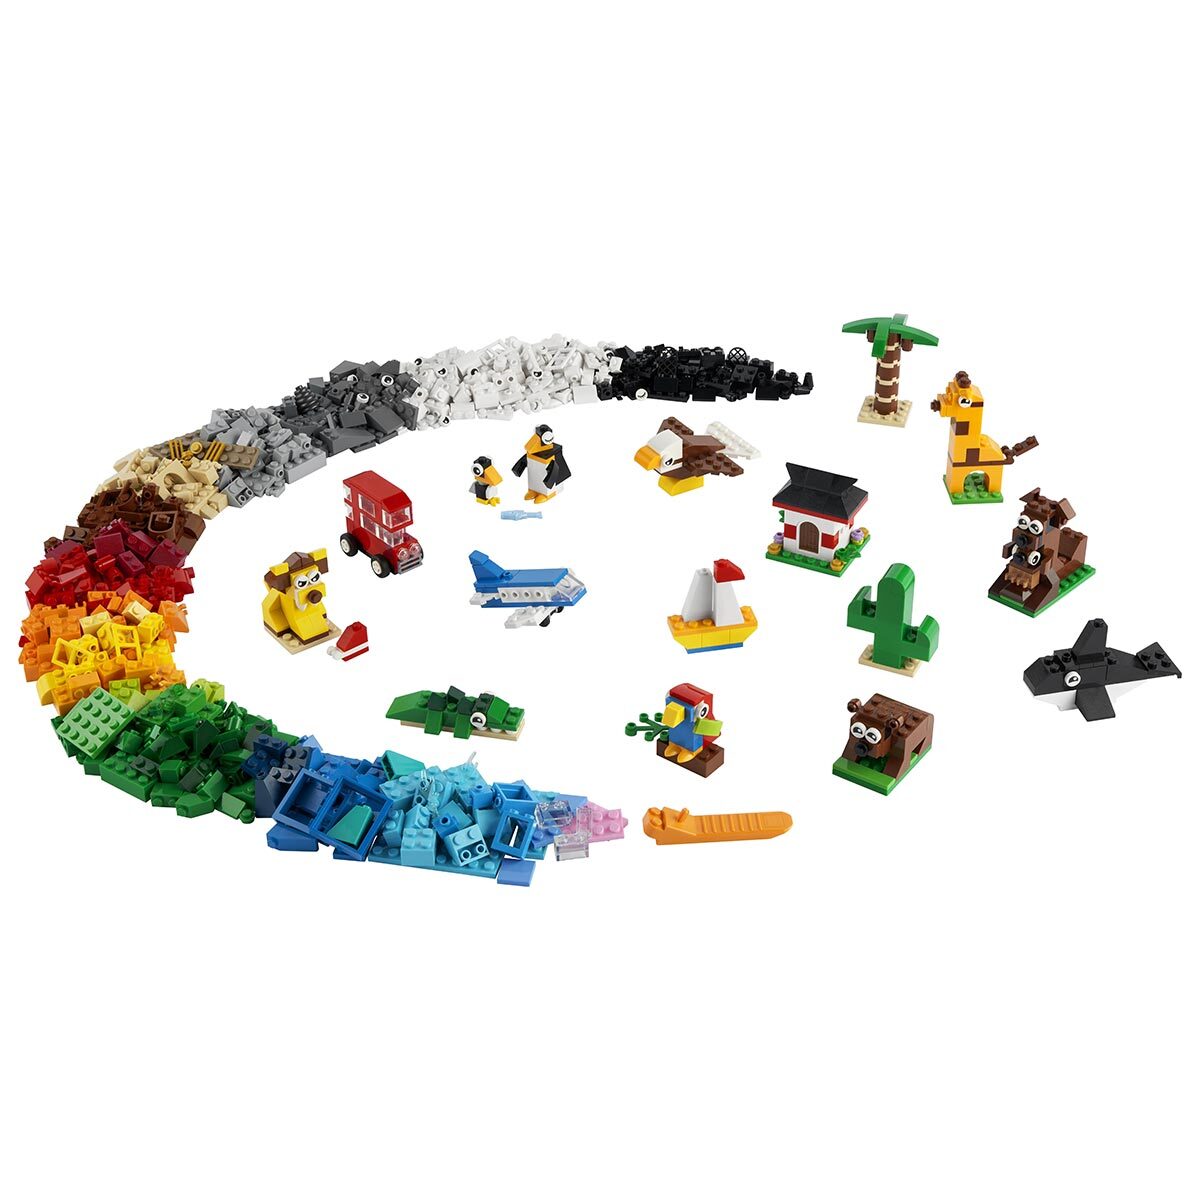 Buy LEGO Classic Around the World Overview Image at costco.co.uk